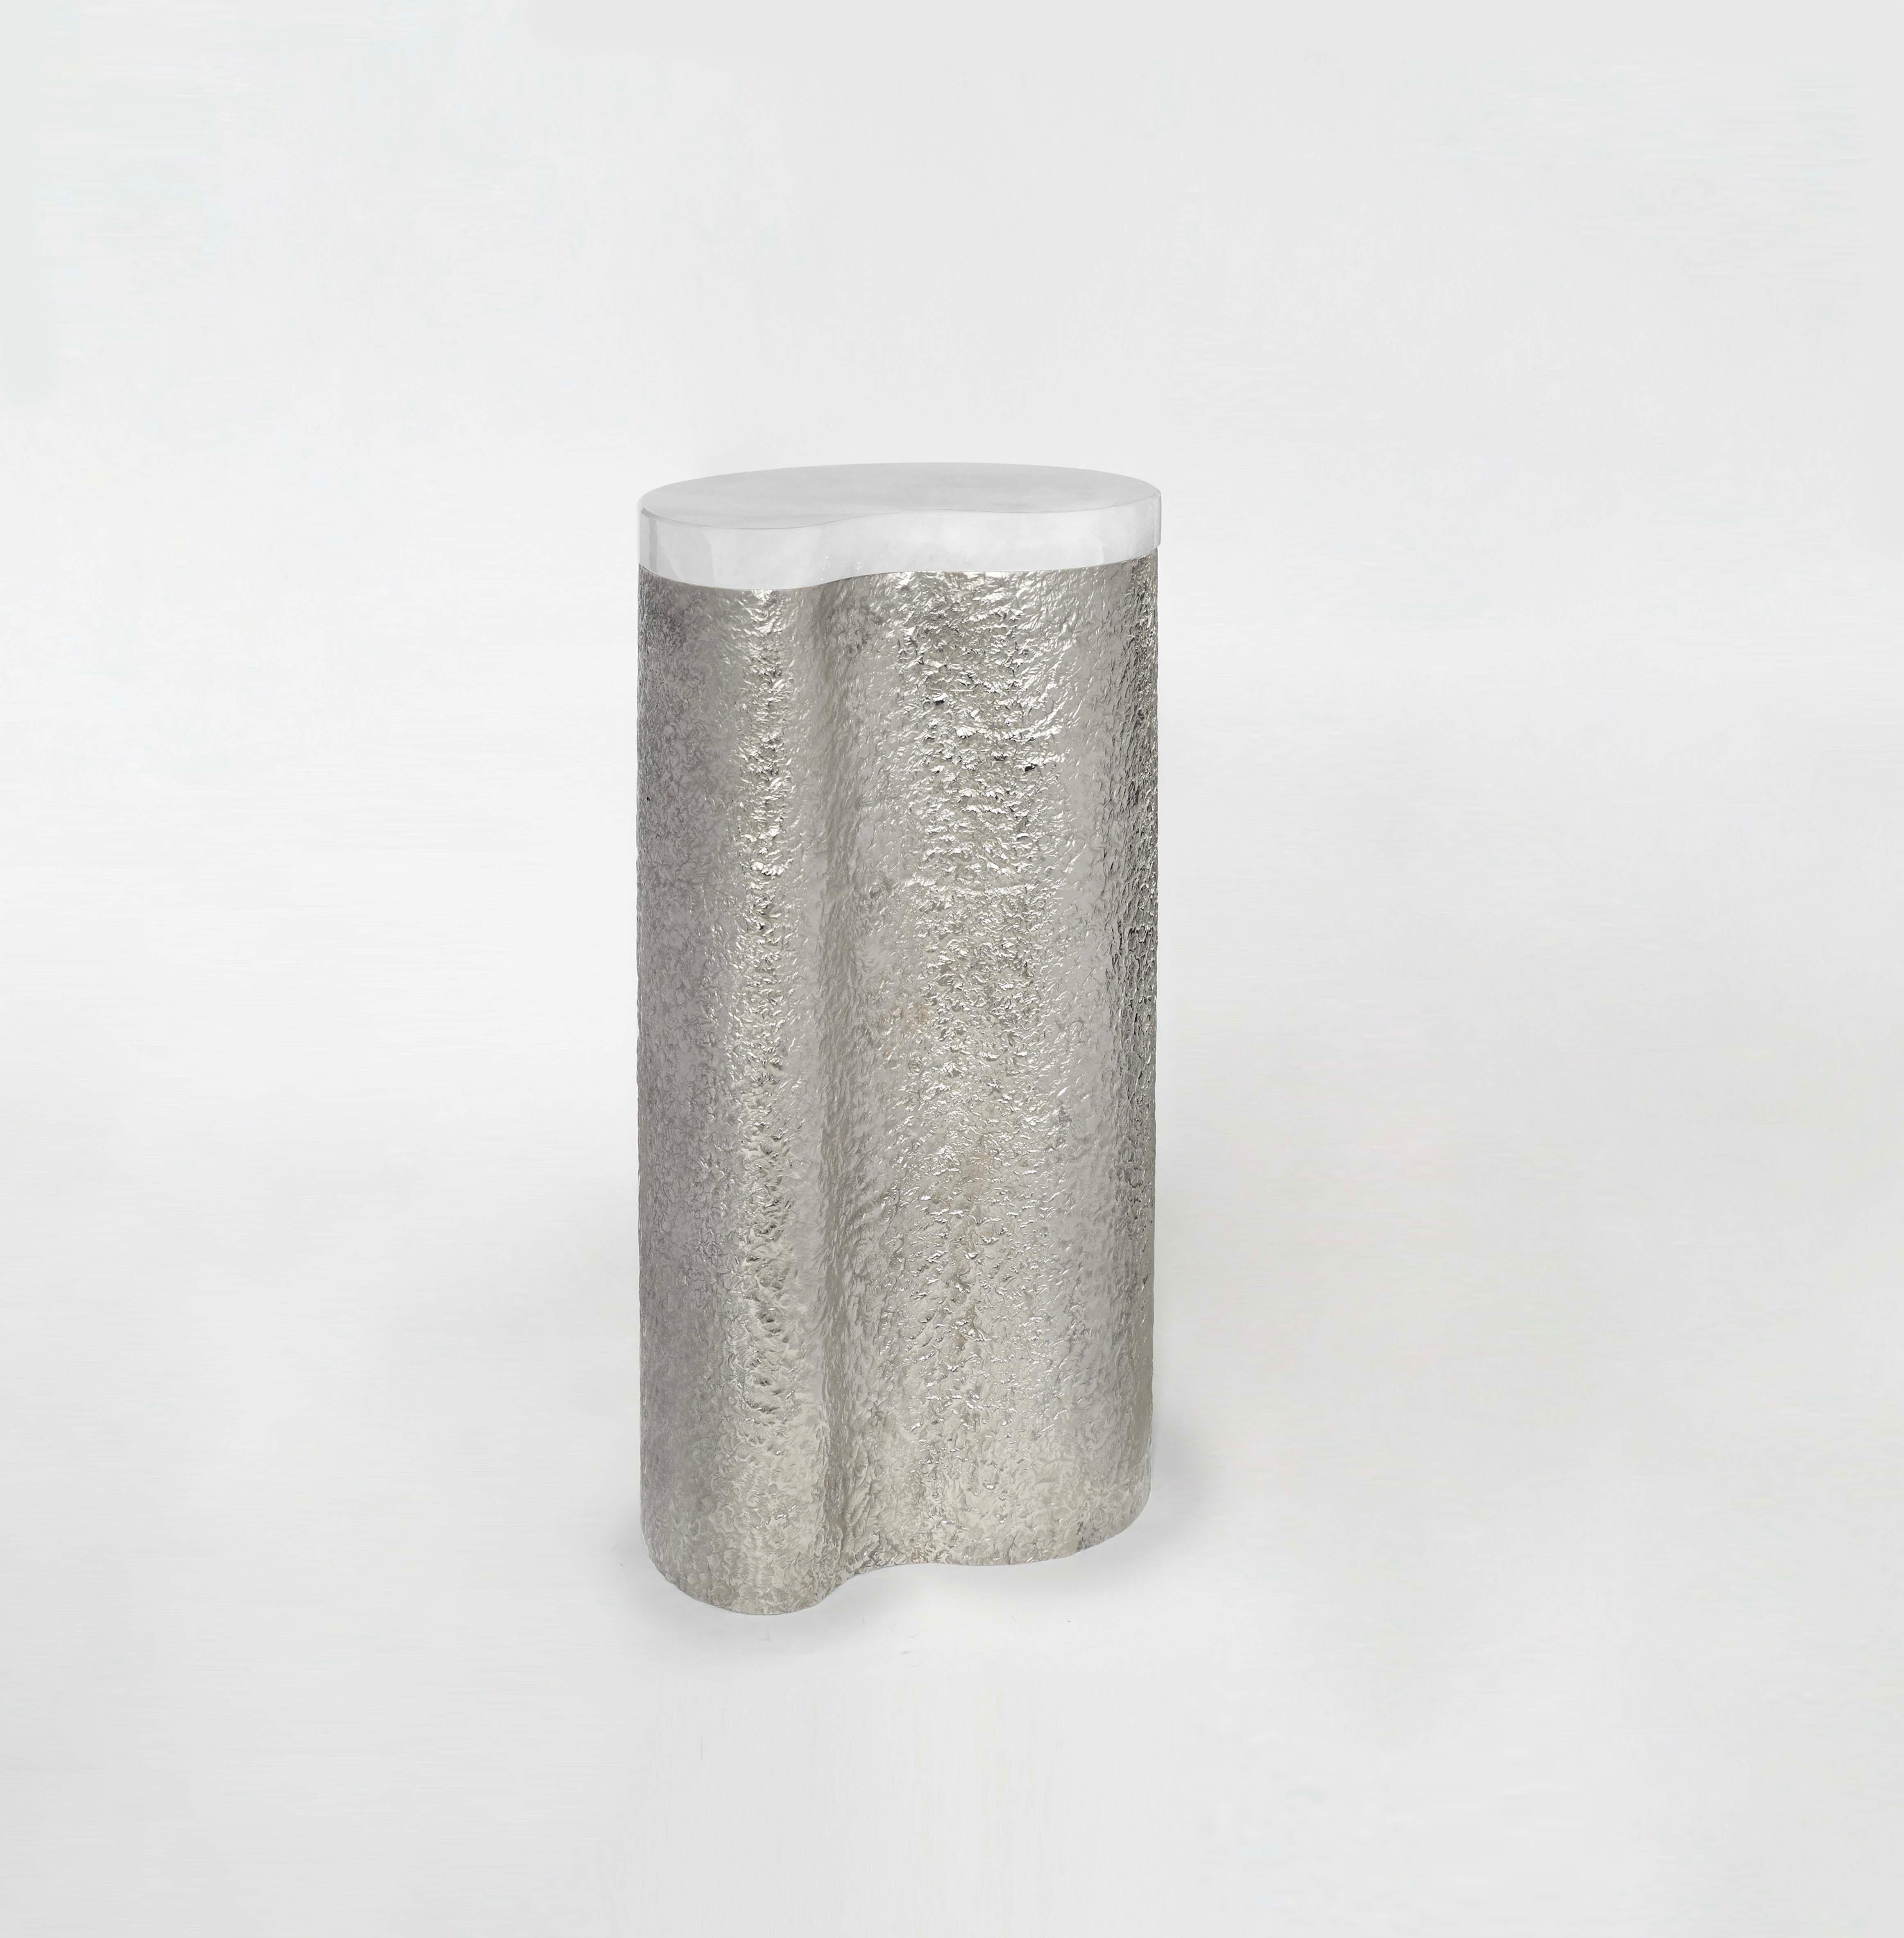 Cloud form rock crystal side table with the hammered nickel base. Created by Phoenix gallery, NYC. 
Custom size, finish, and quantity upon request.